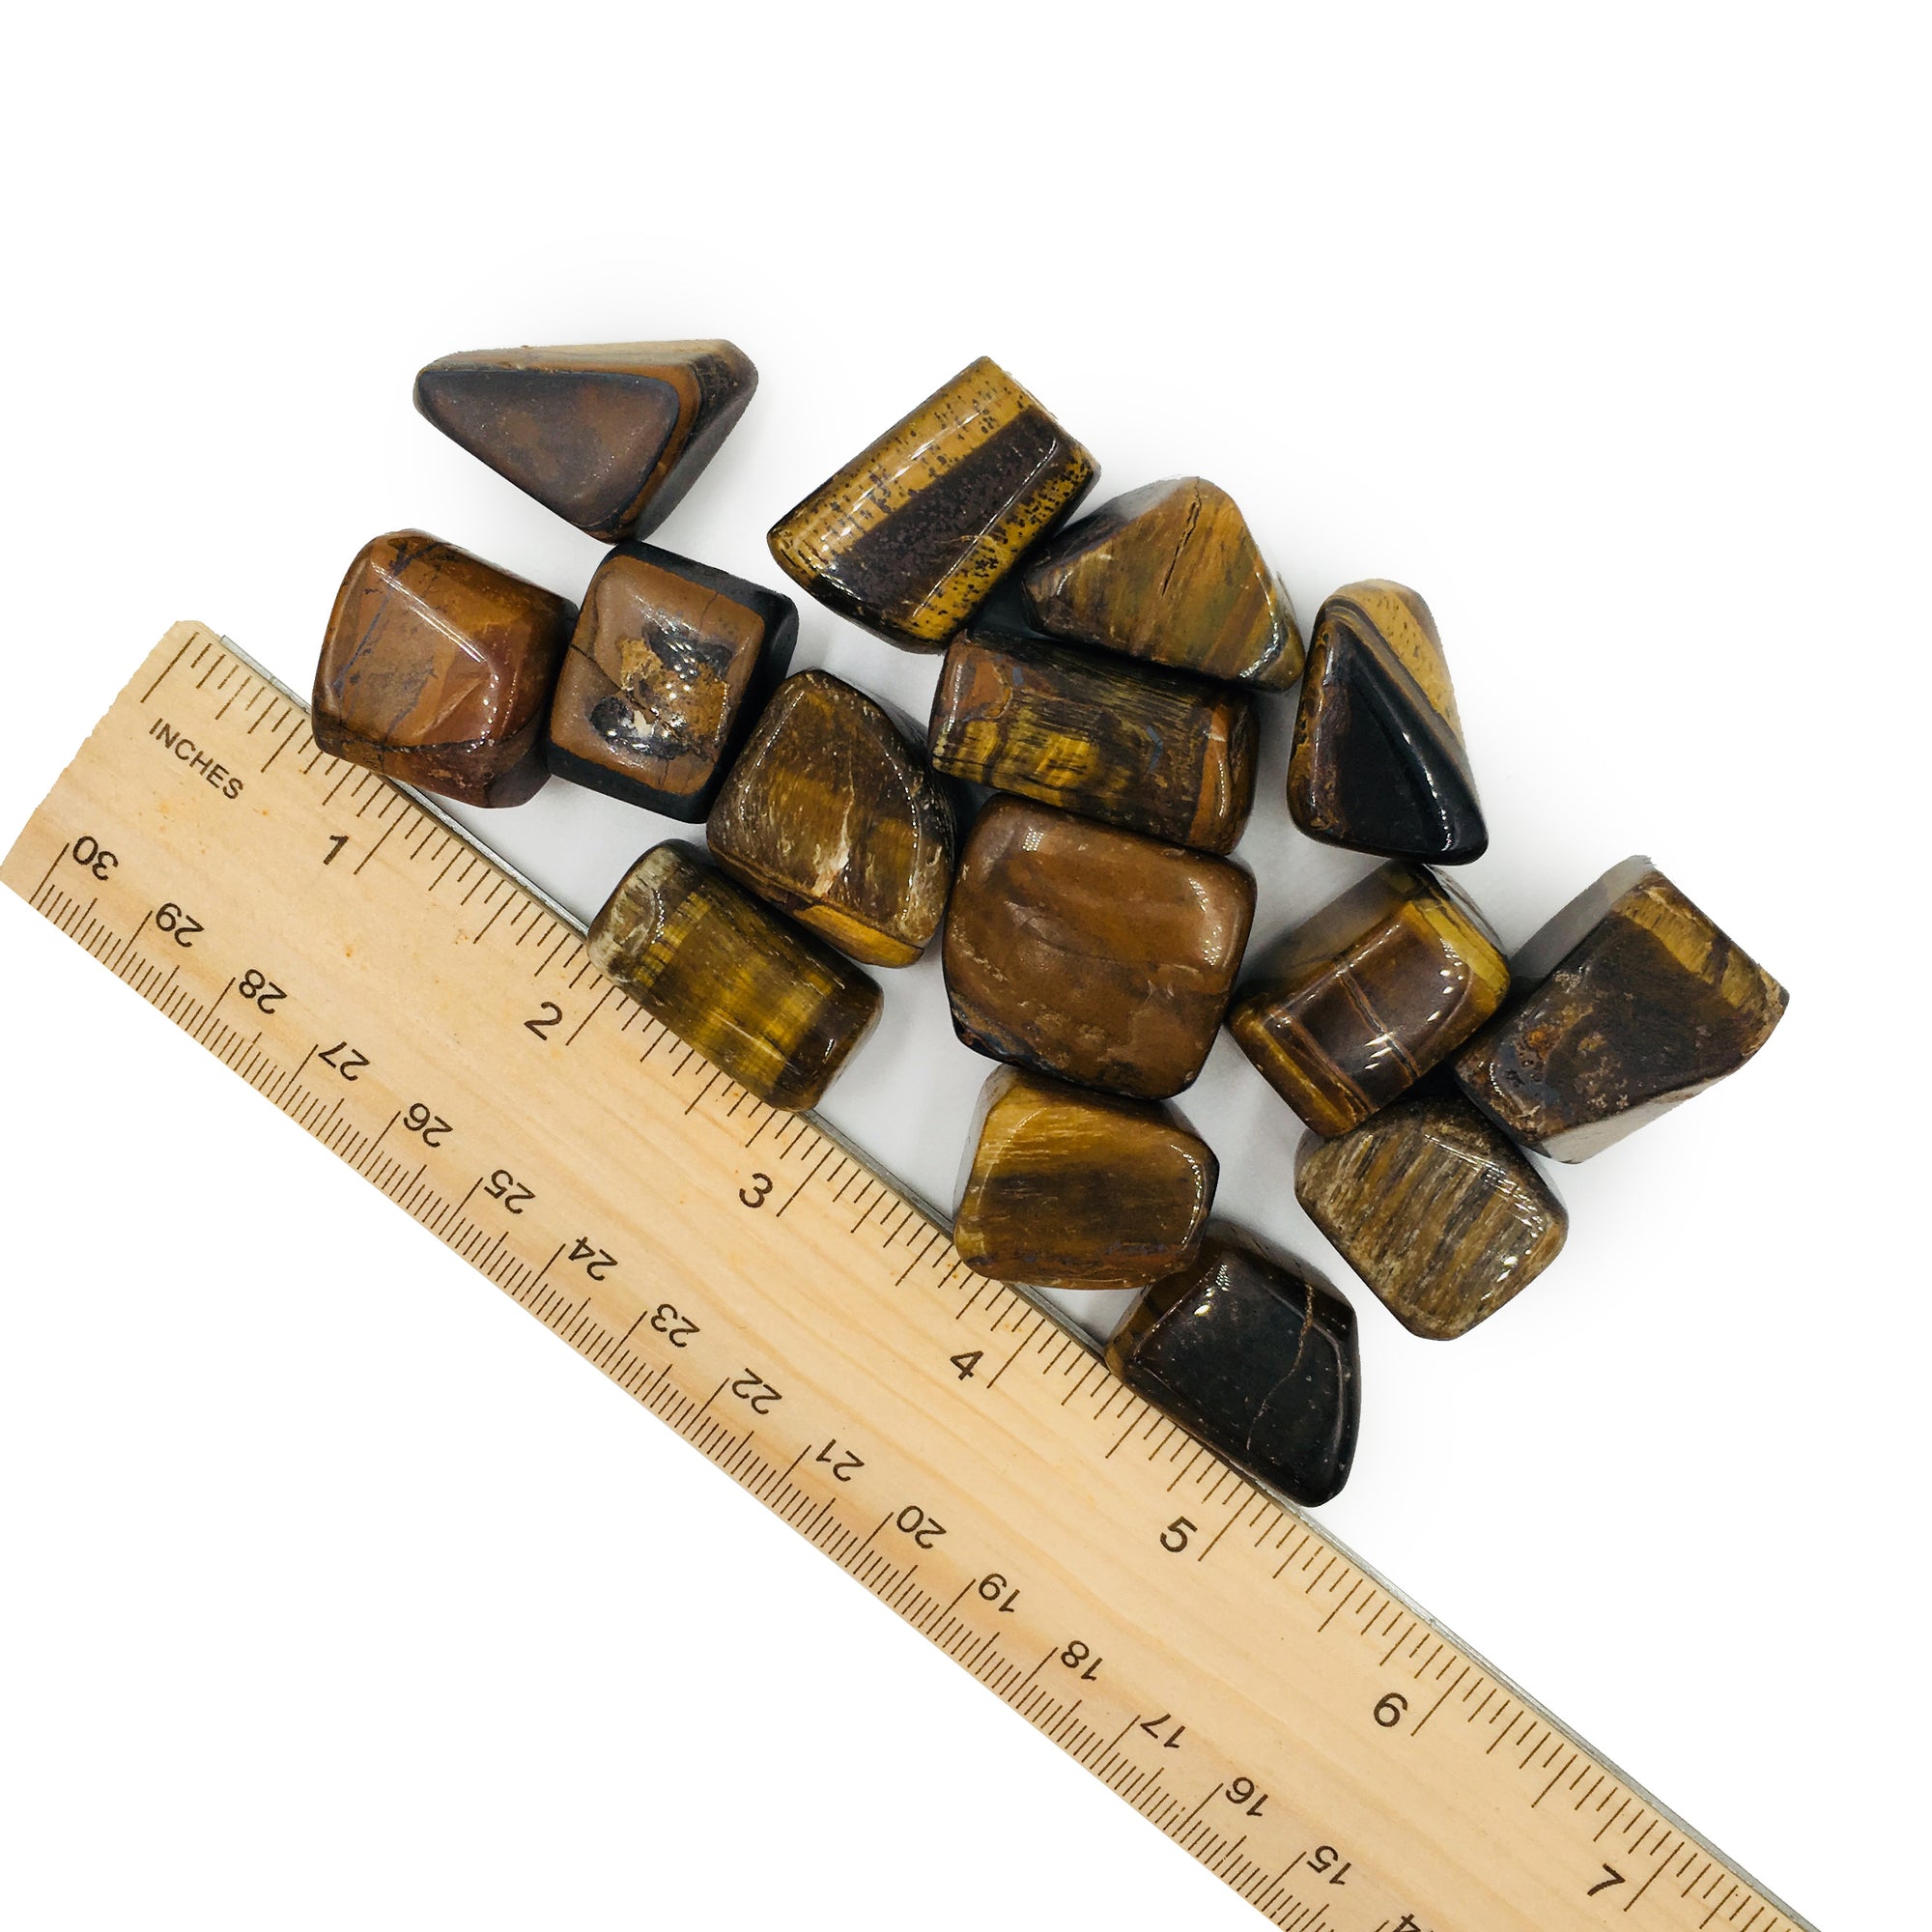 Single Tiger’s Eye Stone (Clearance - Discontinued)